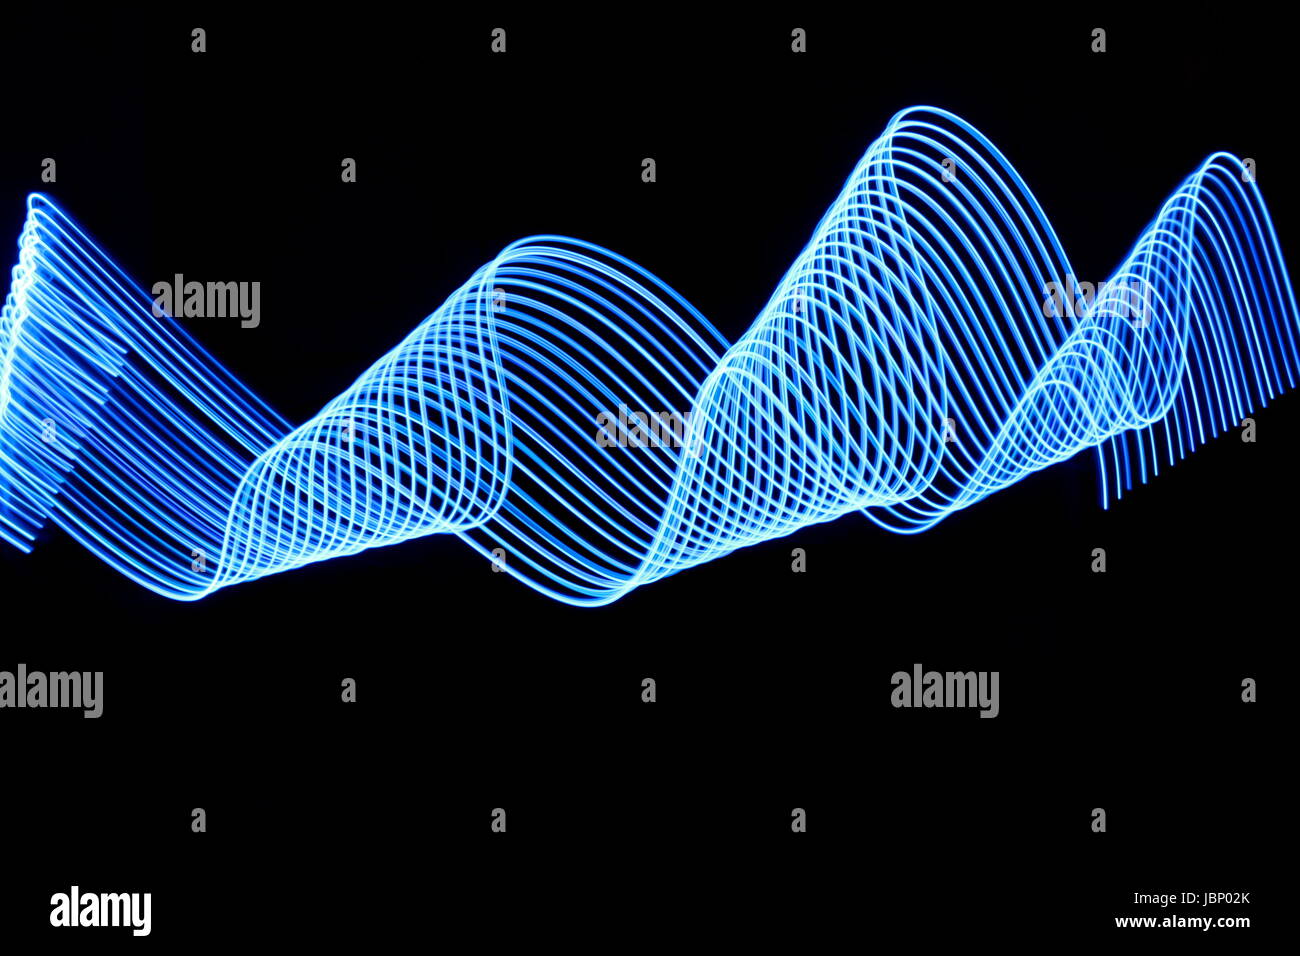 Blue Light Painting photography, ripples and swirls of electric blue parallel lines, against a black background Stock Photo